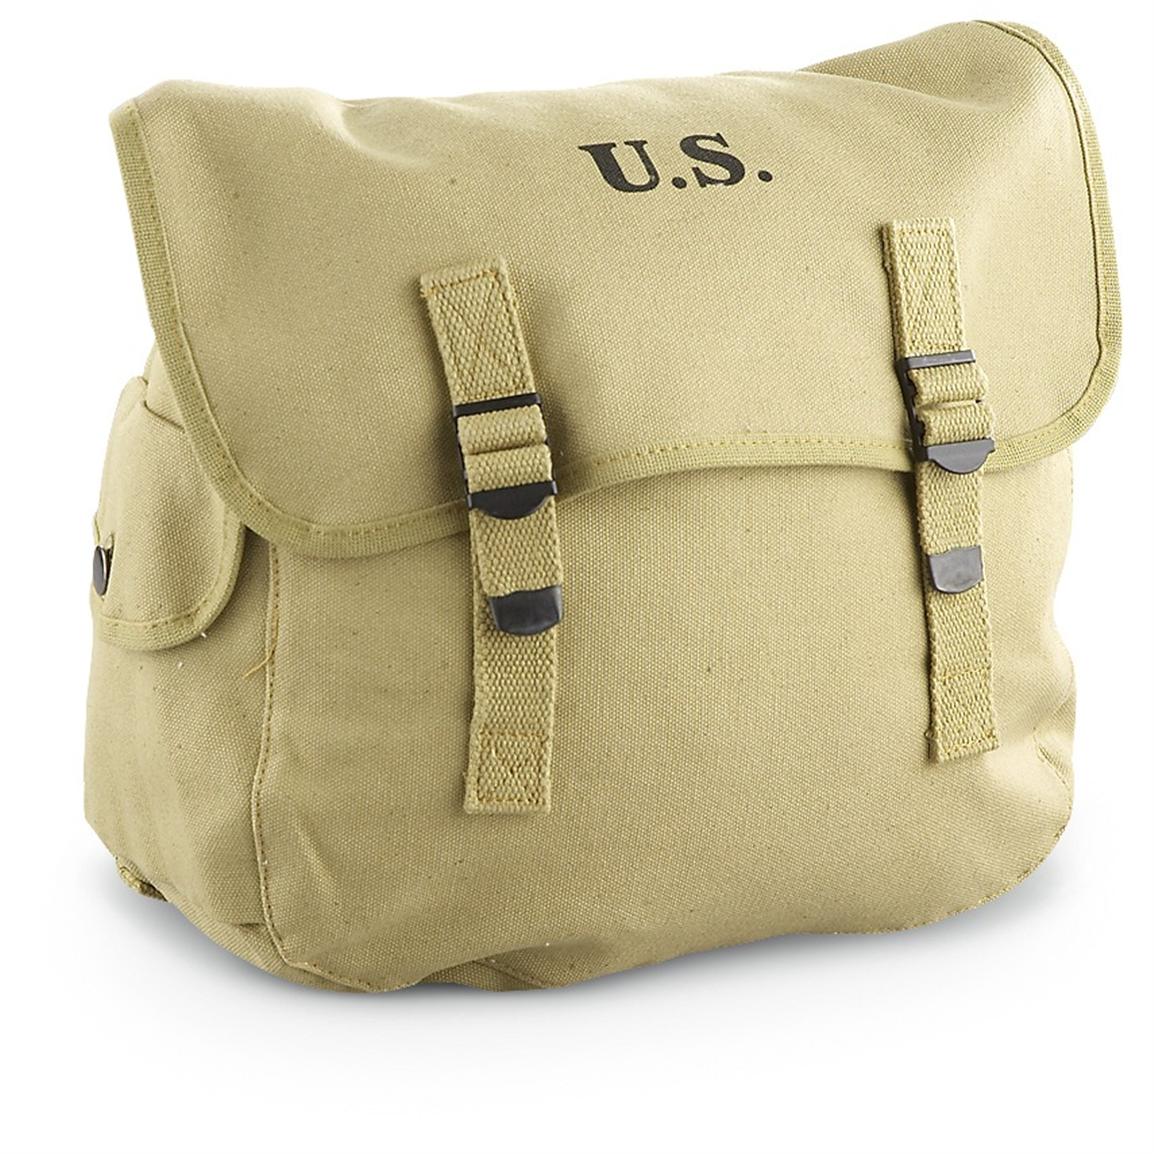 Reproduction WWII U.S. Military Musette Bag, Khaki - 183015, Field Gear at Sportsman&#39;s Guide